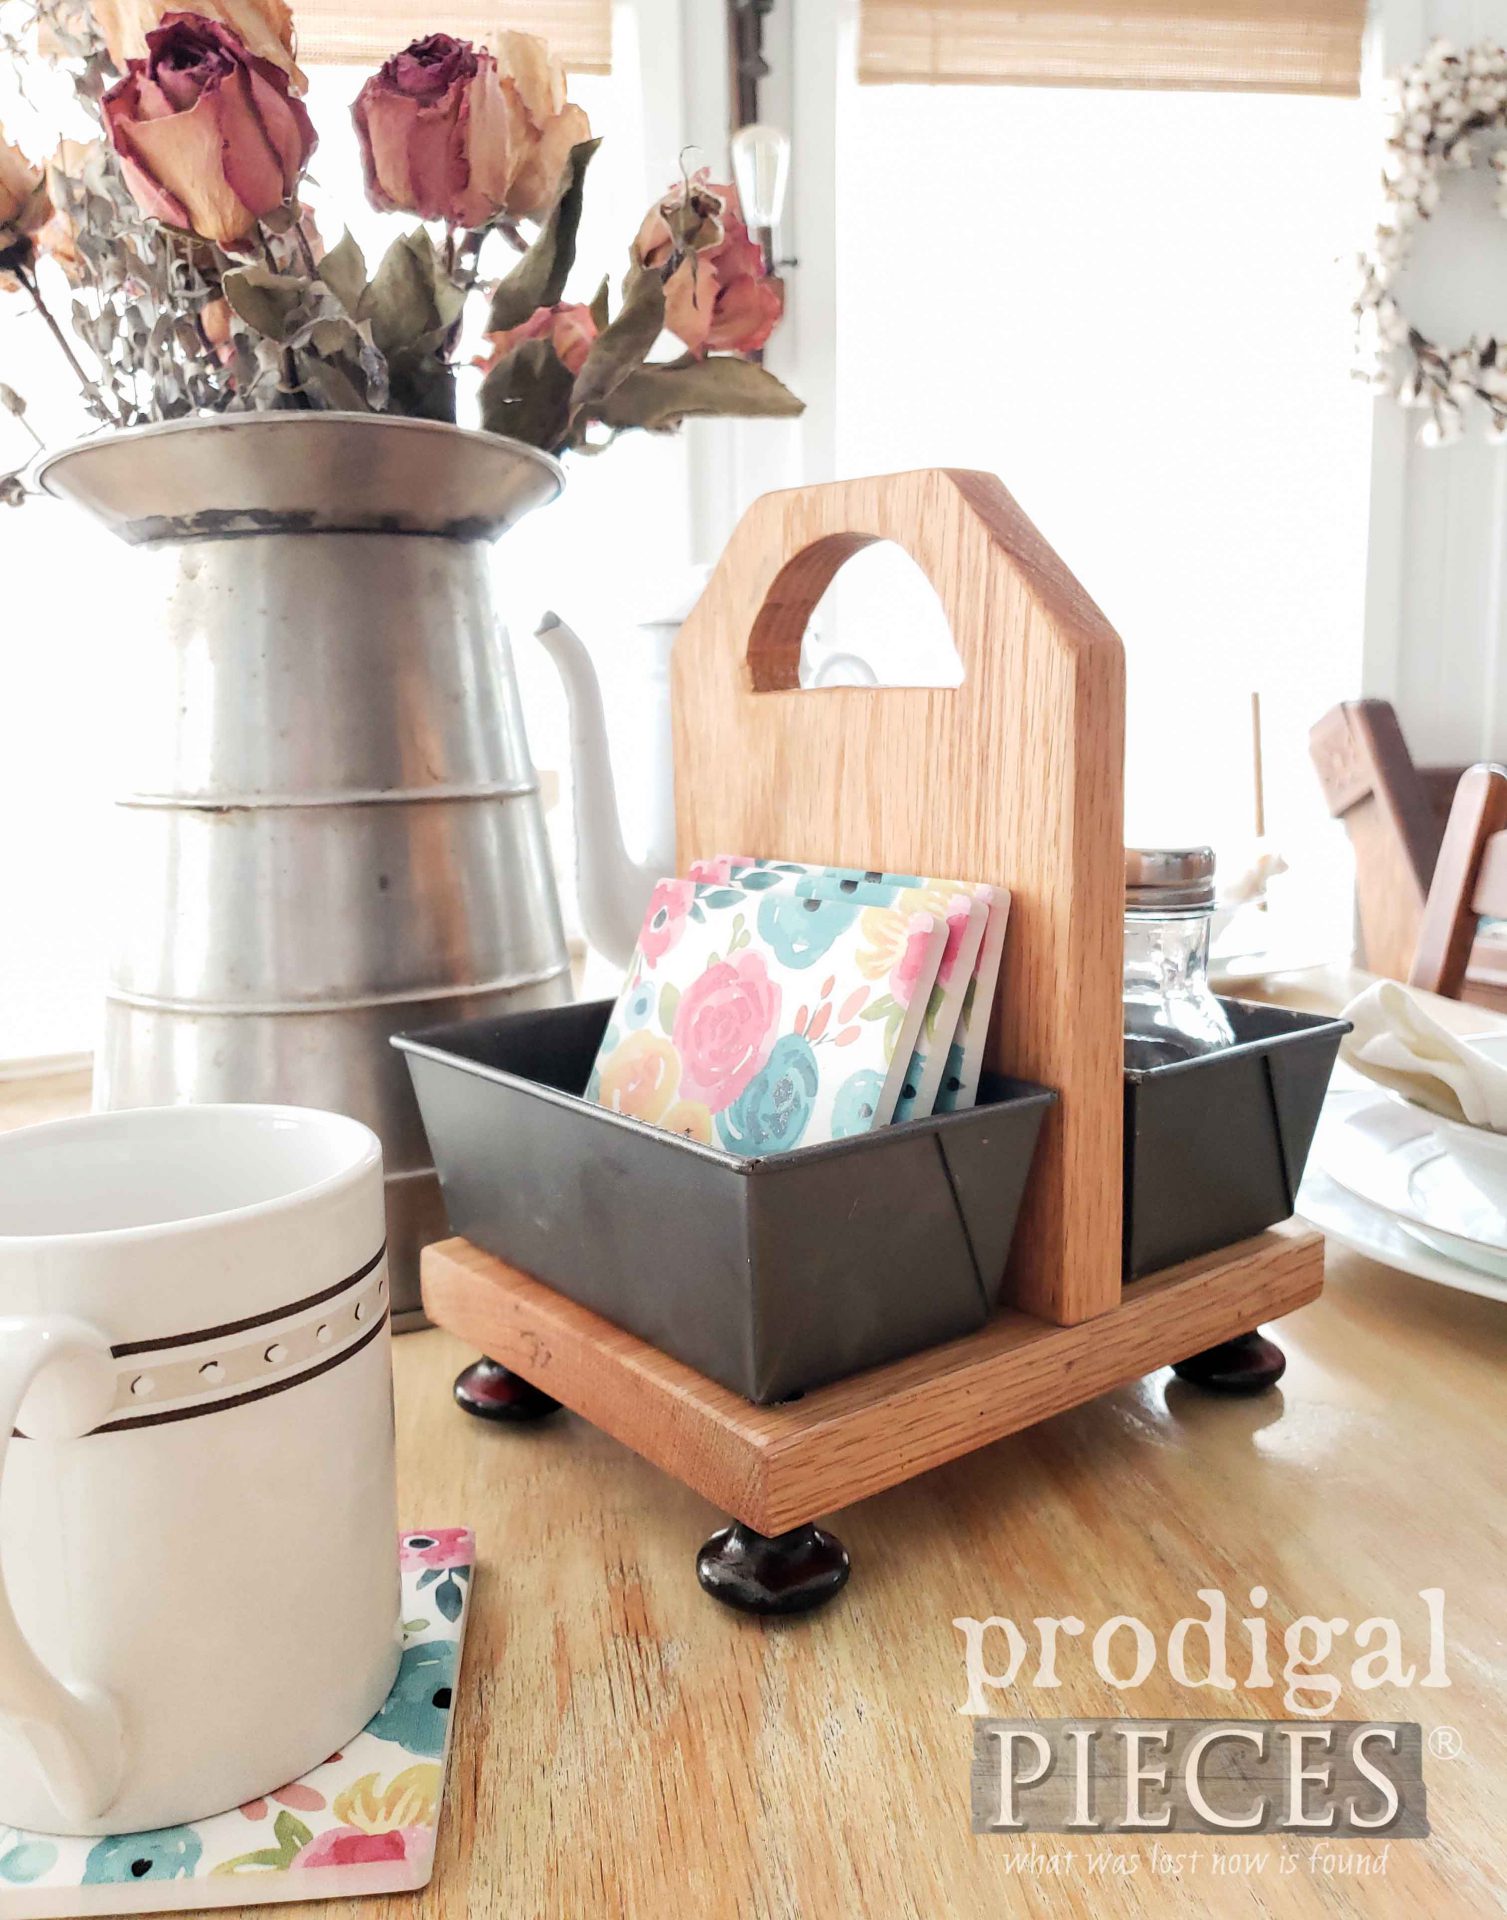 Repurposed Bread Pan Caddy for Home Decor by Larissa of Prodigal Pieces | prodigalpieces.com #prodigalpieces #diy #home #homedecor #farmhouse